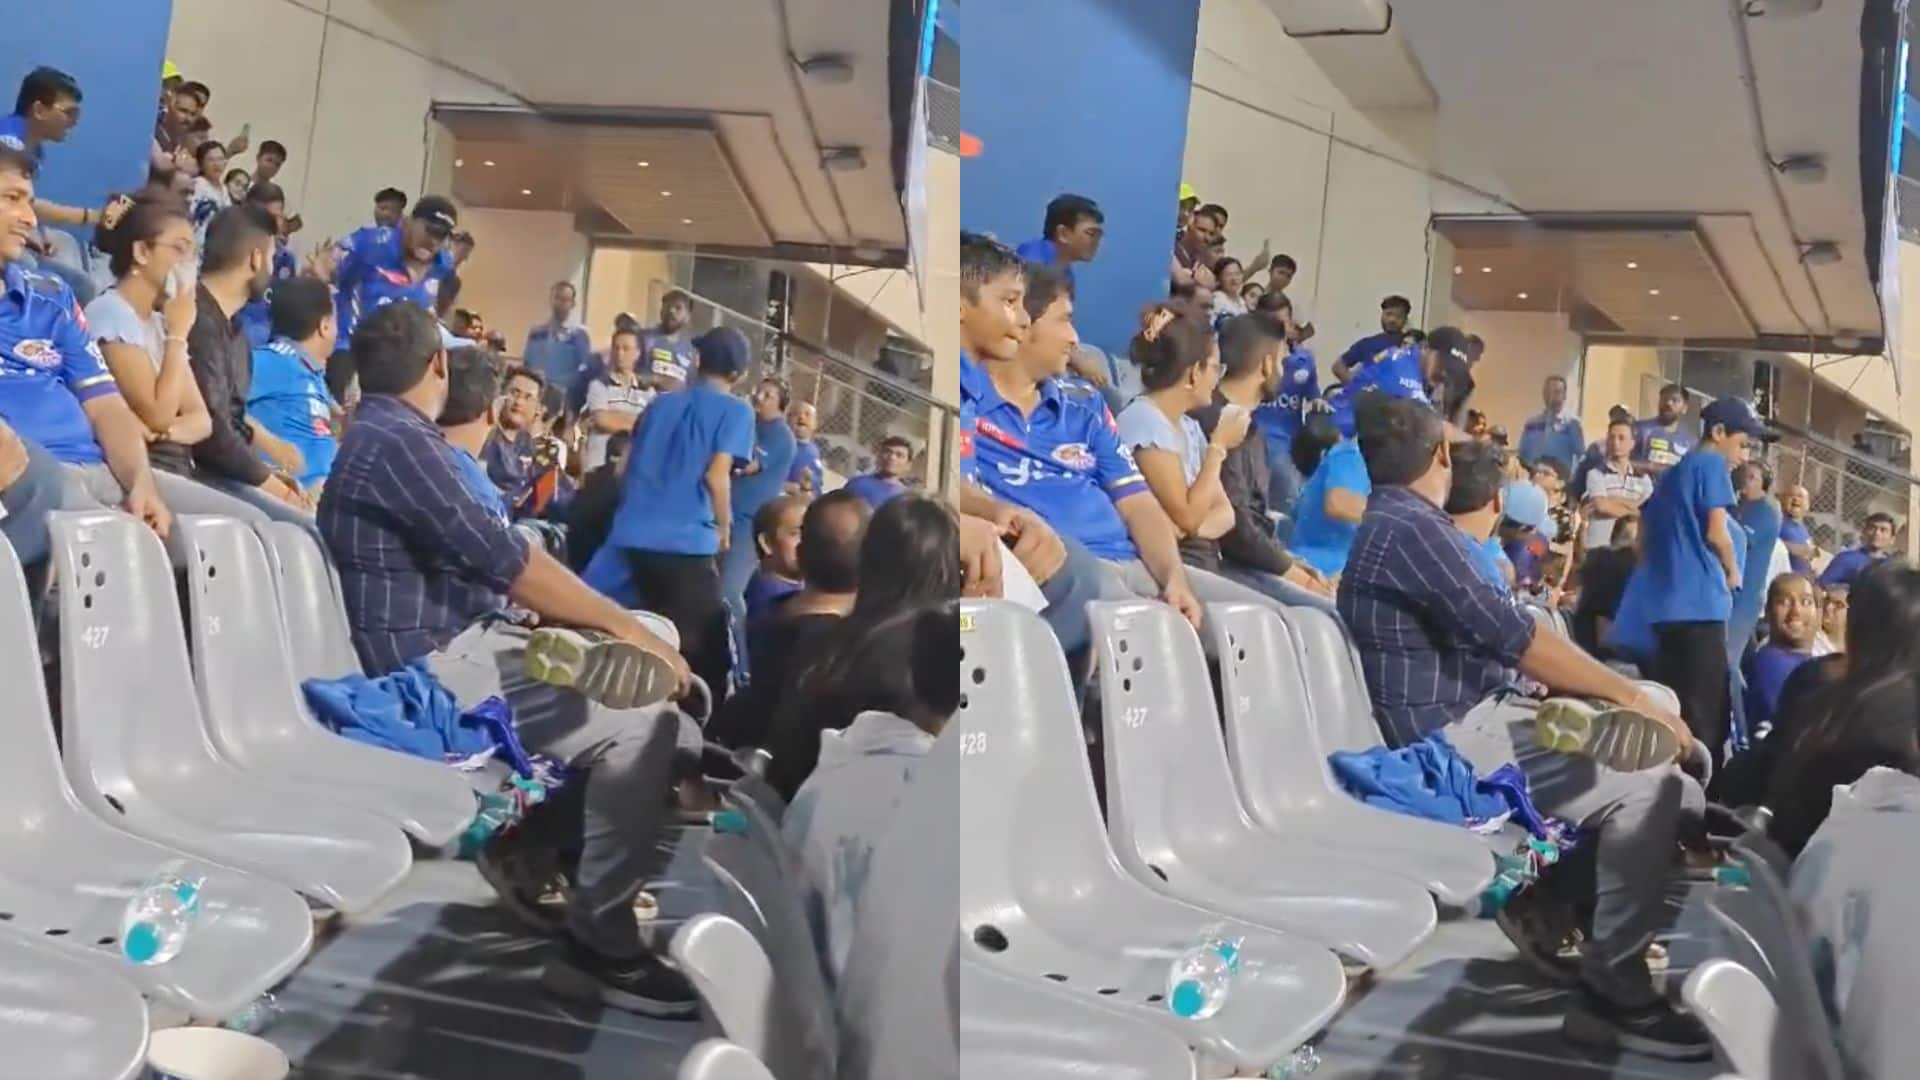 An MI fan lost his cool during IPL game vs LSG [X.com]